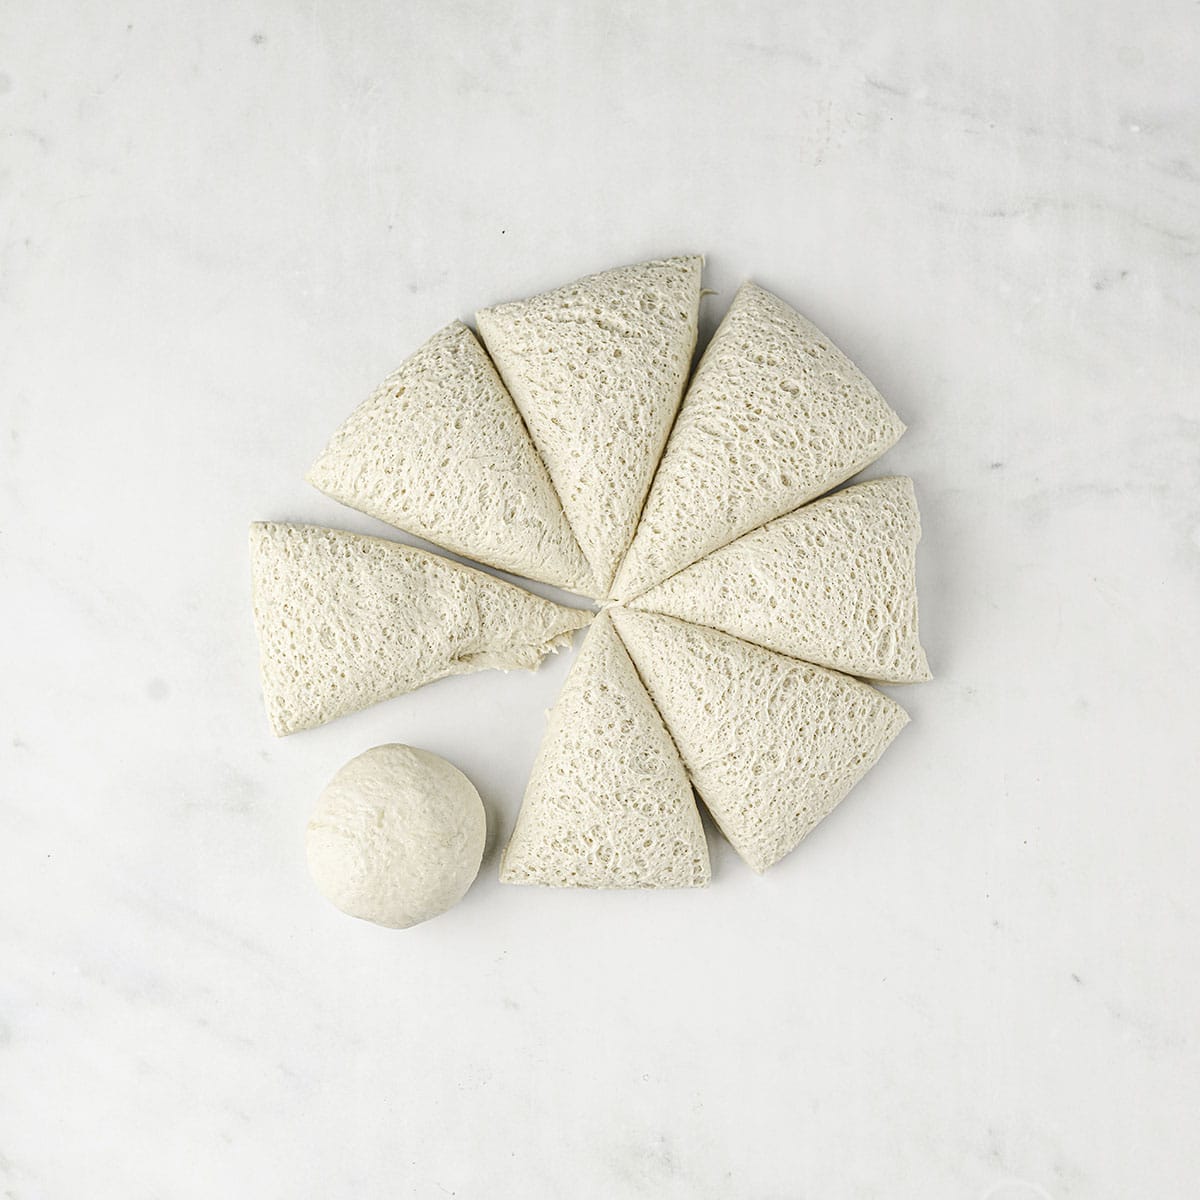 Dough on a white surface, cut into 8 triangular pieces, with one rolled into a ball.